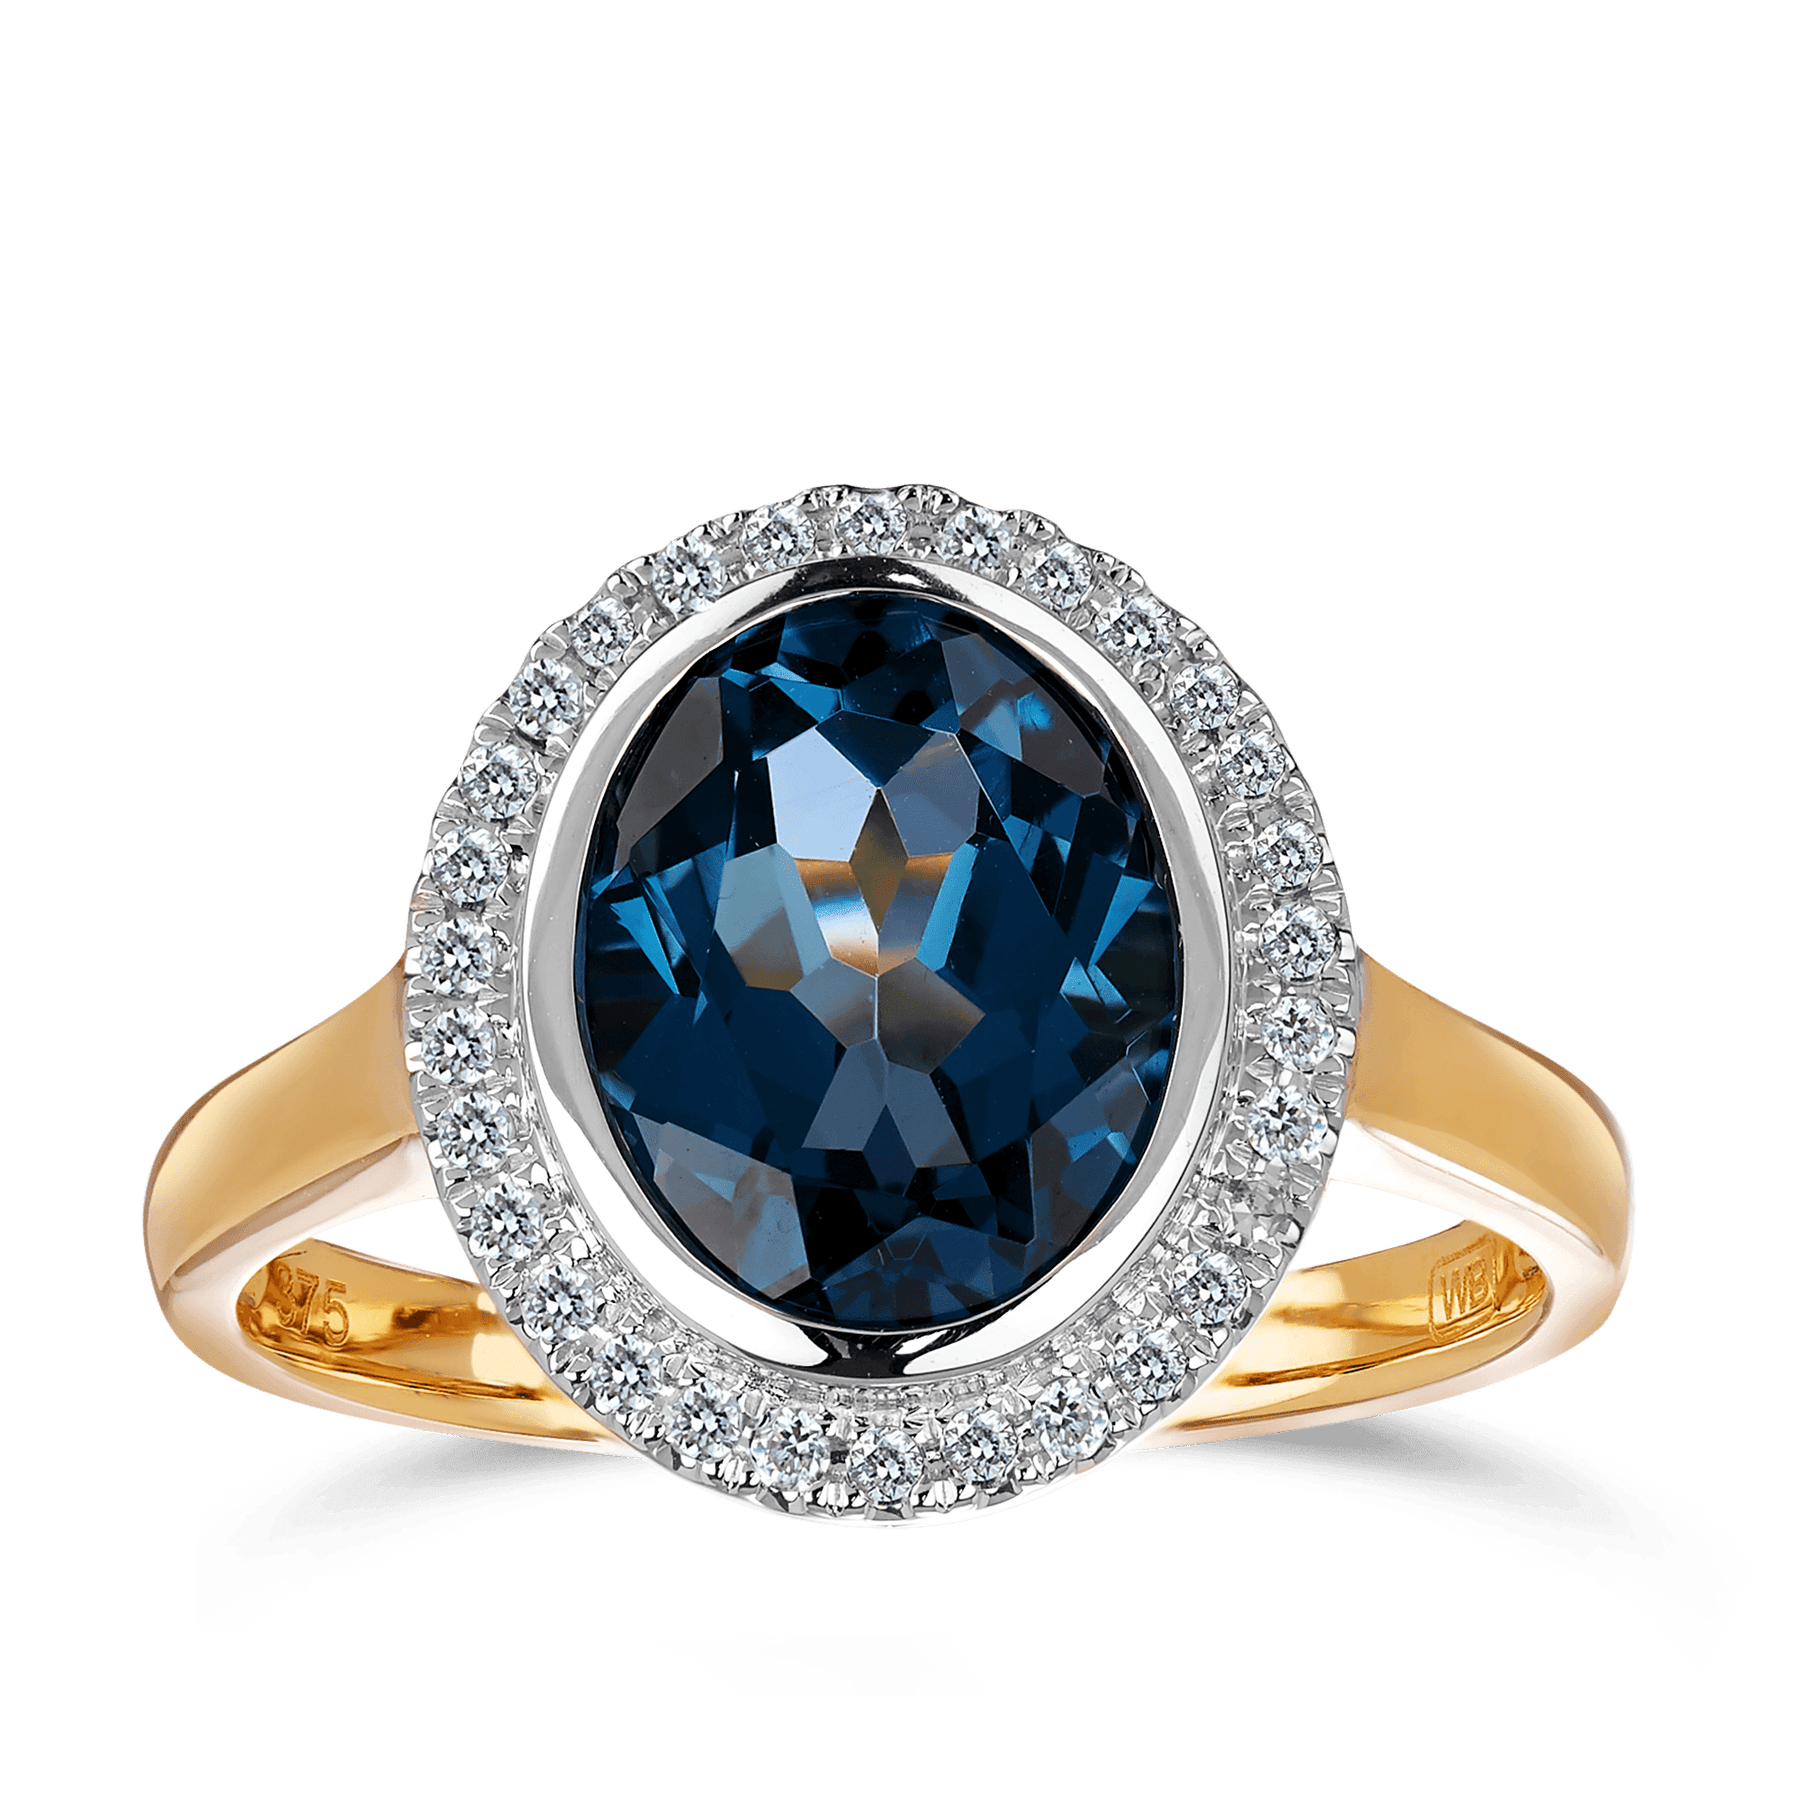 Blue Topaz & Diamond Dress Ring in 9ct Yellow Gold - Wallace Bishop